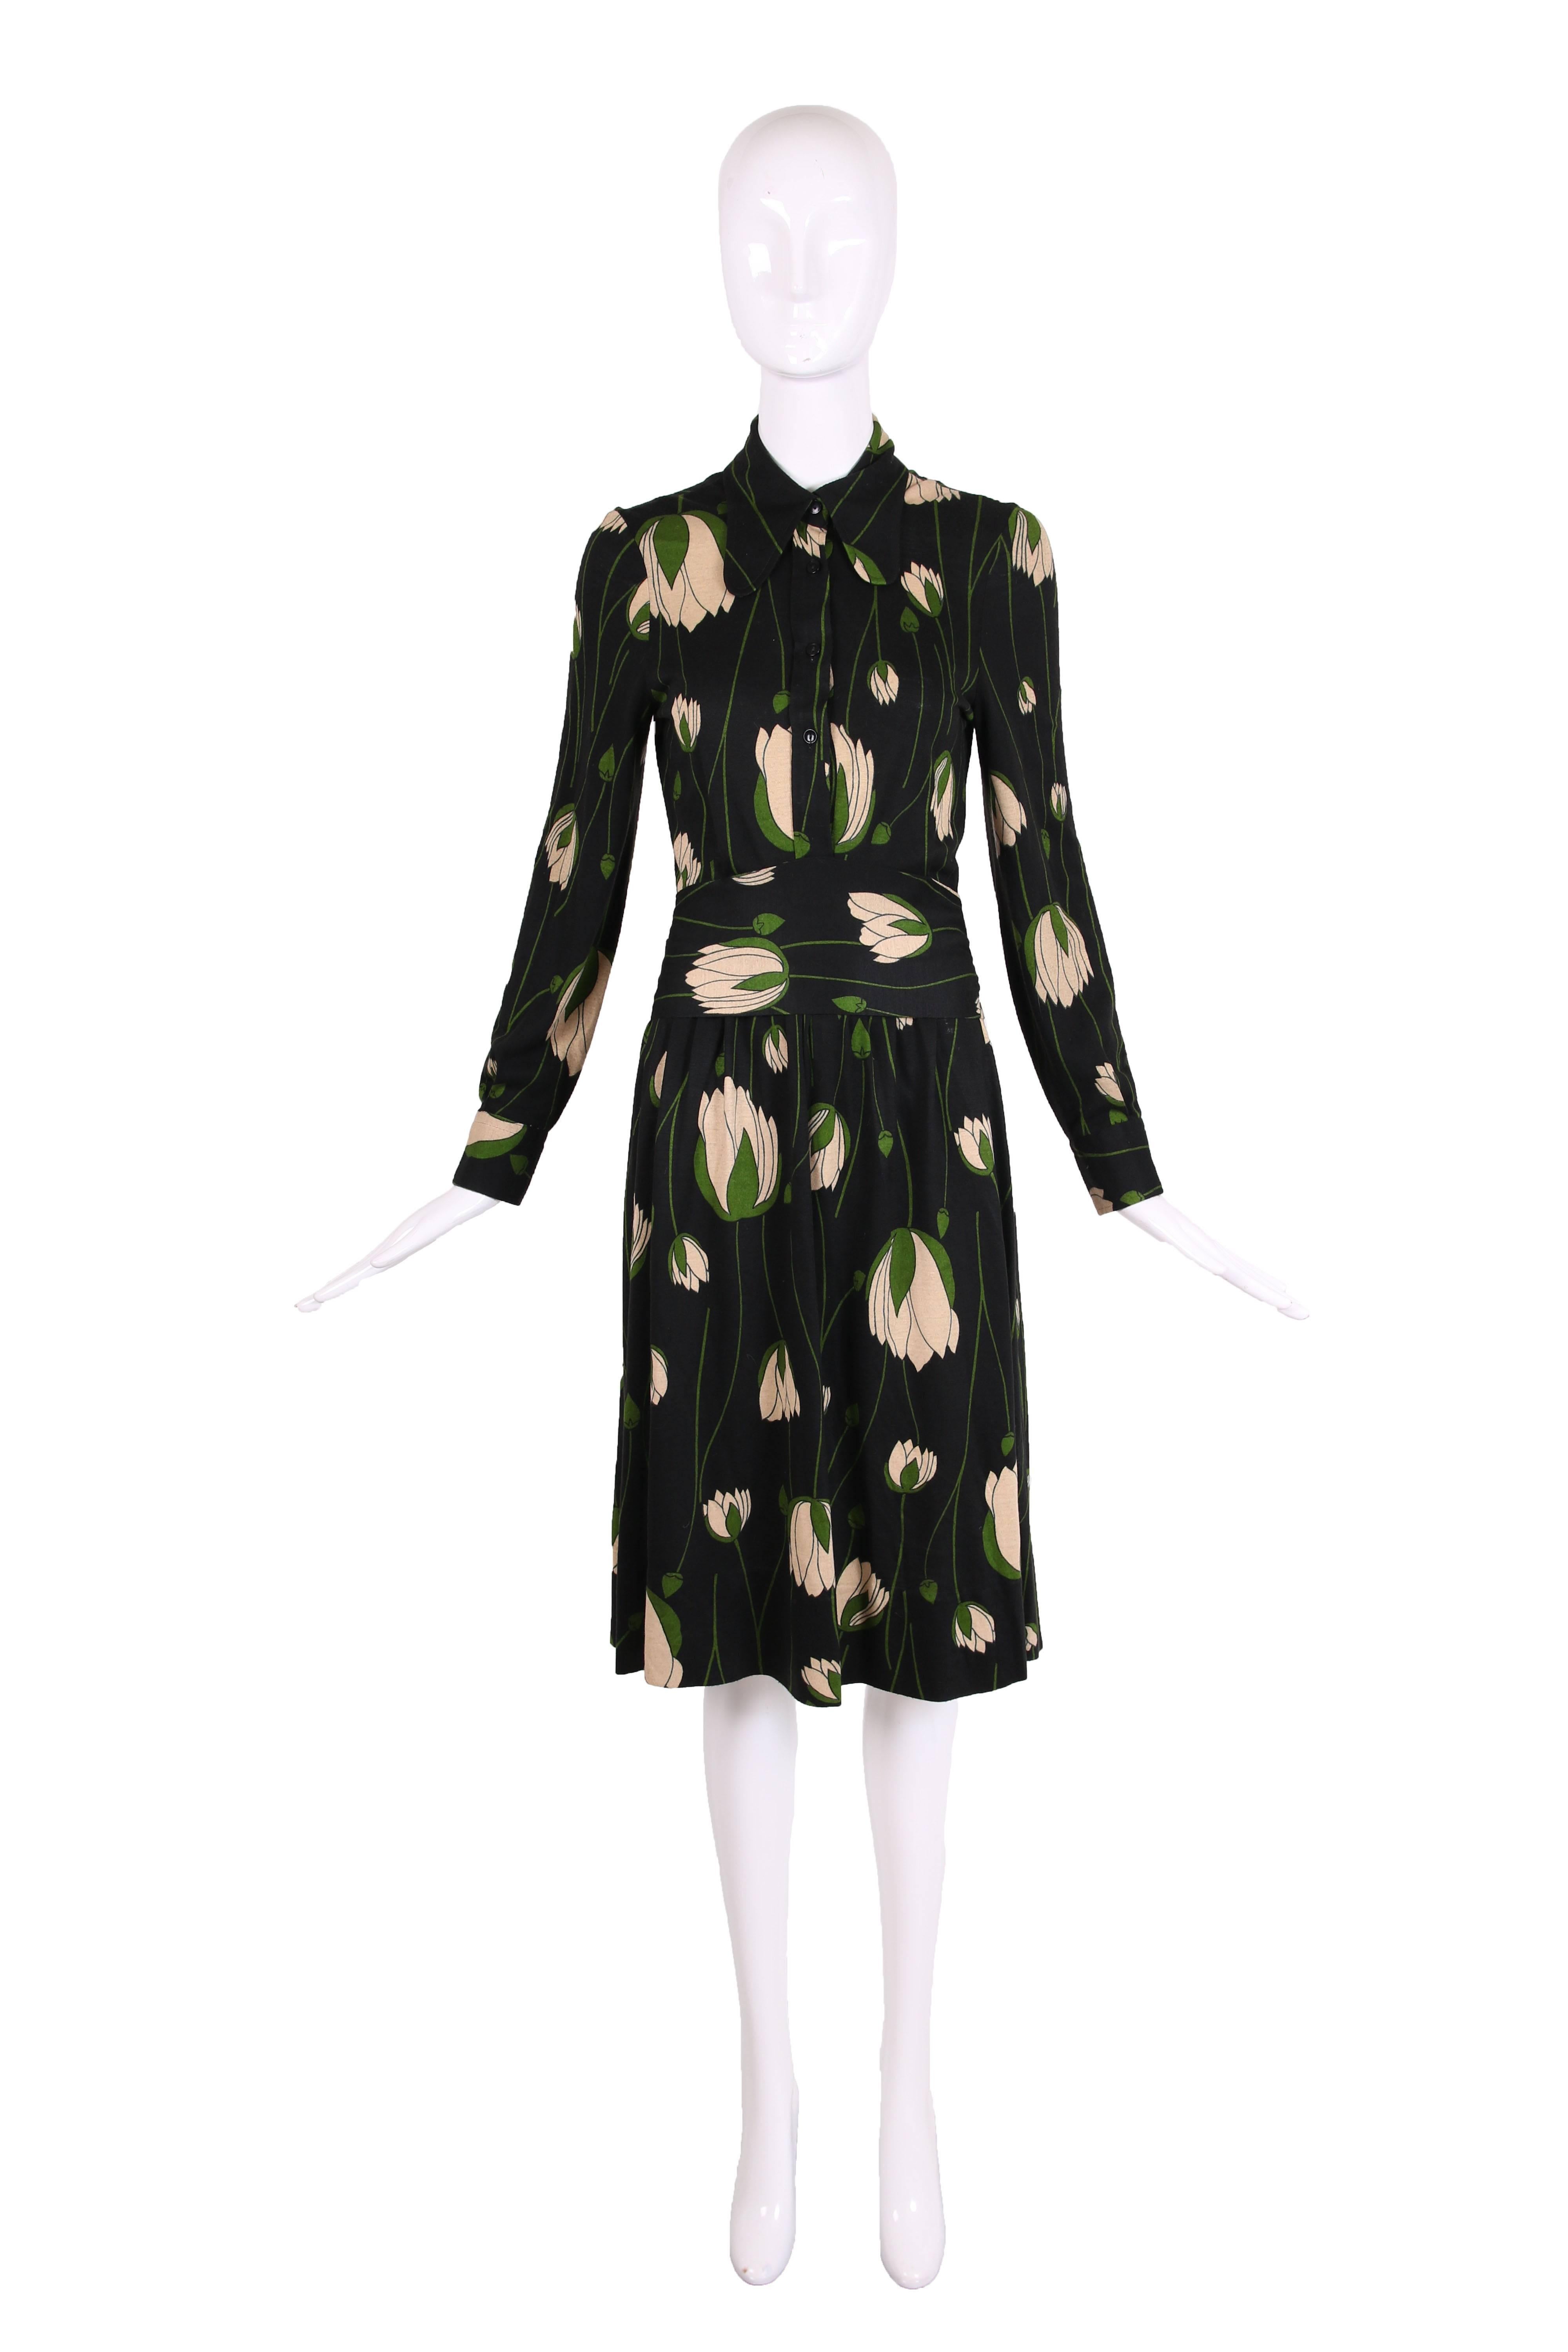 1970's Diane Von Furstenberg black stretch fabric dress with collar, long sleeves, four top buttons, and waist tie that wraps around back. Tulip print in cream and green. In excellent condition. Please consult measurements for size.